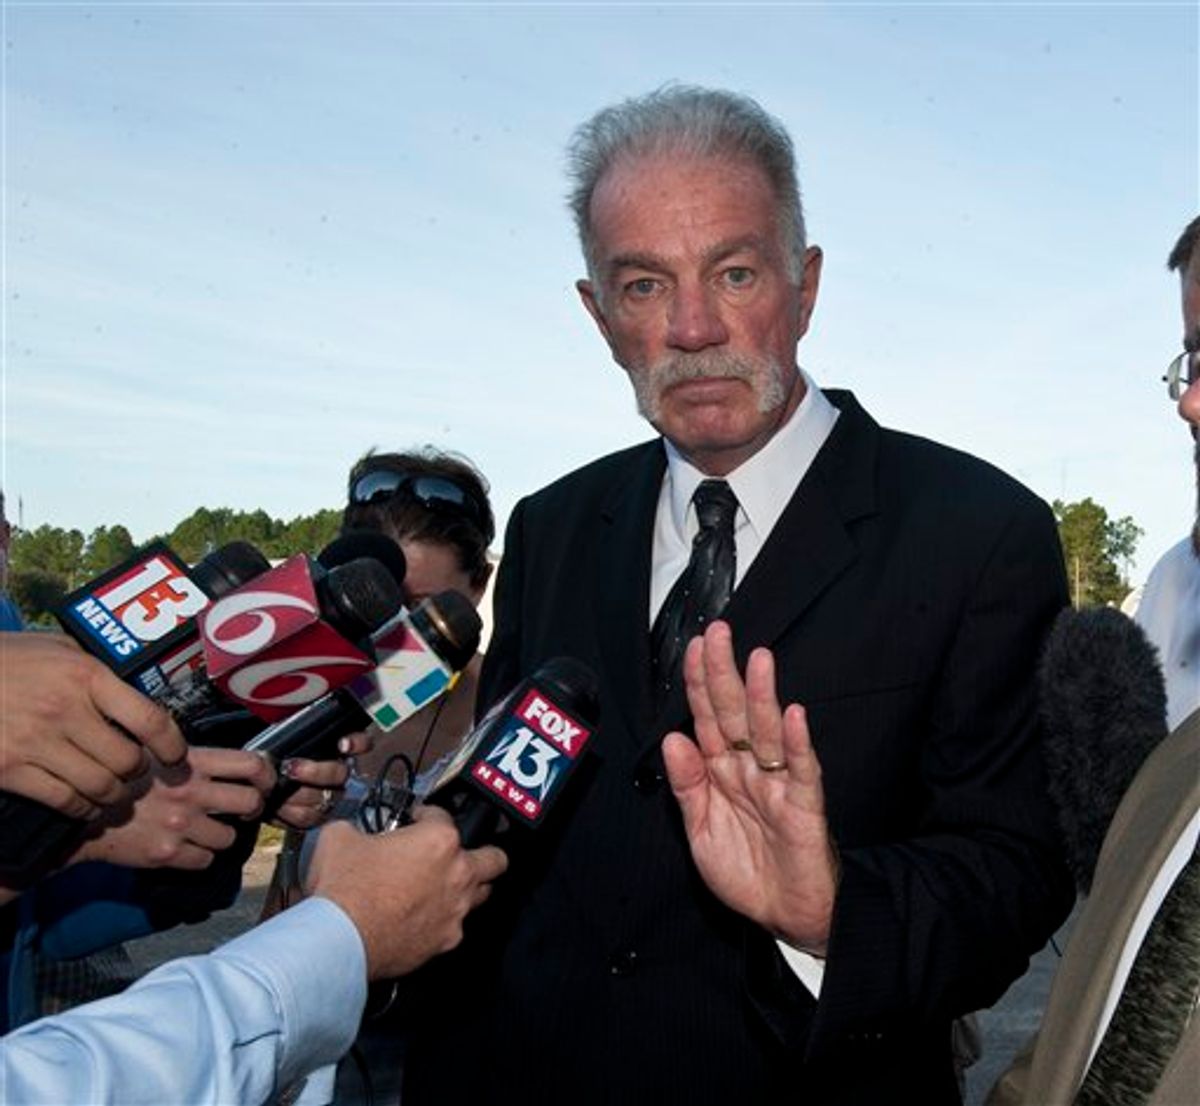 Pastor Terry Jones of the Dove World Outreach Center speaks to the media, Friday, Sept.10, 2010  in Gainsville, Fla.  (AP Photo/Phil Sandlin) (AP)